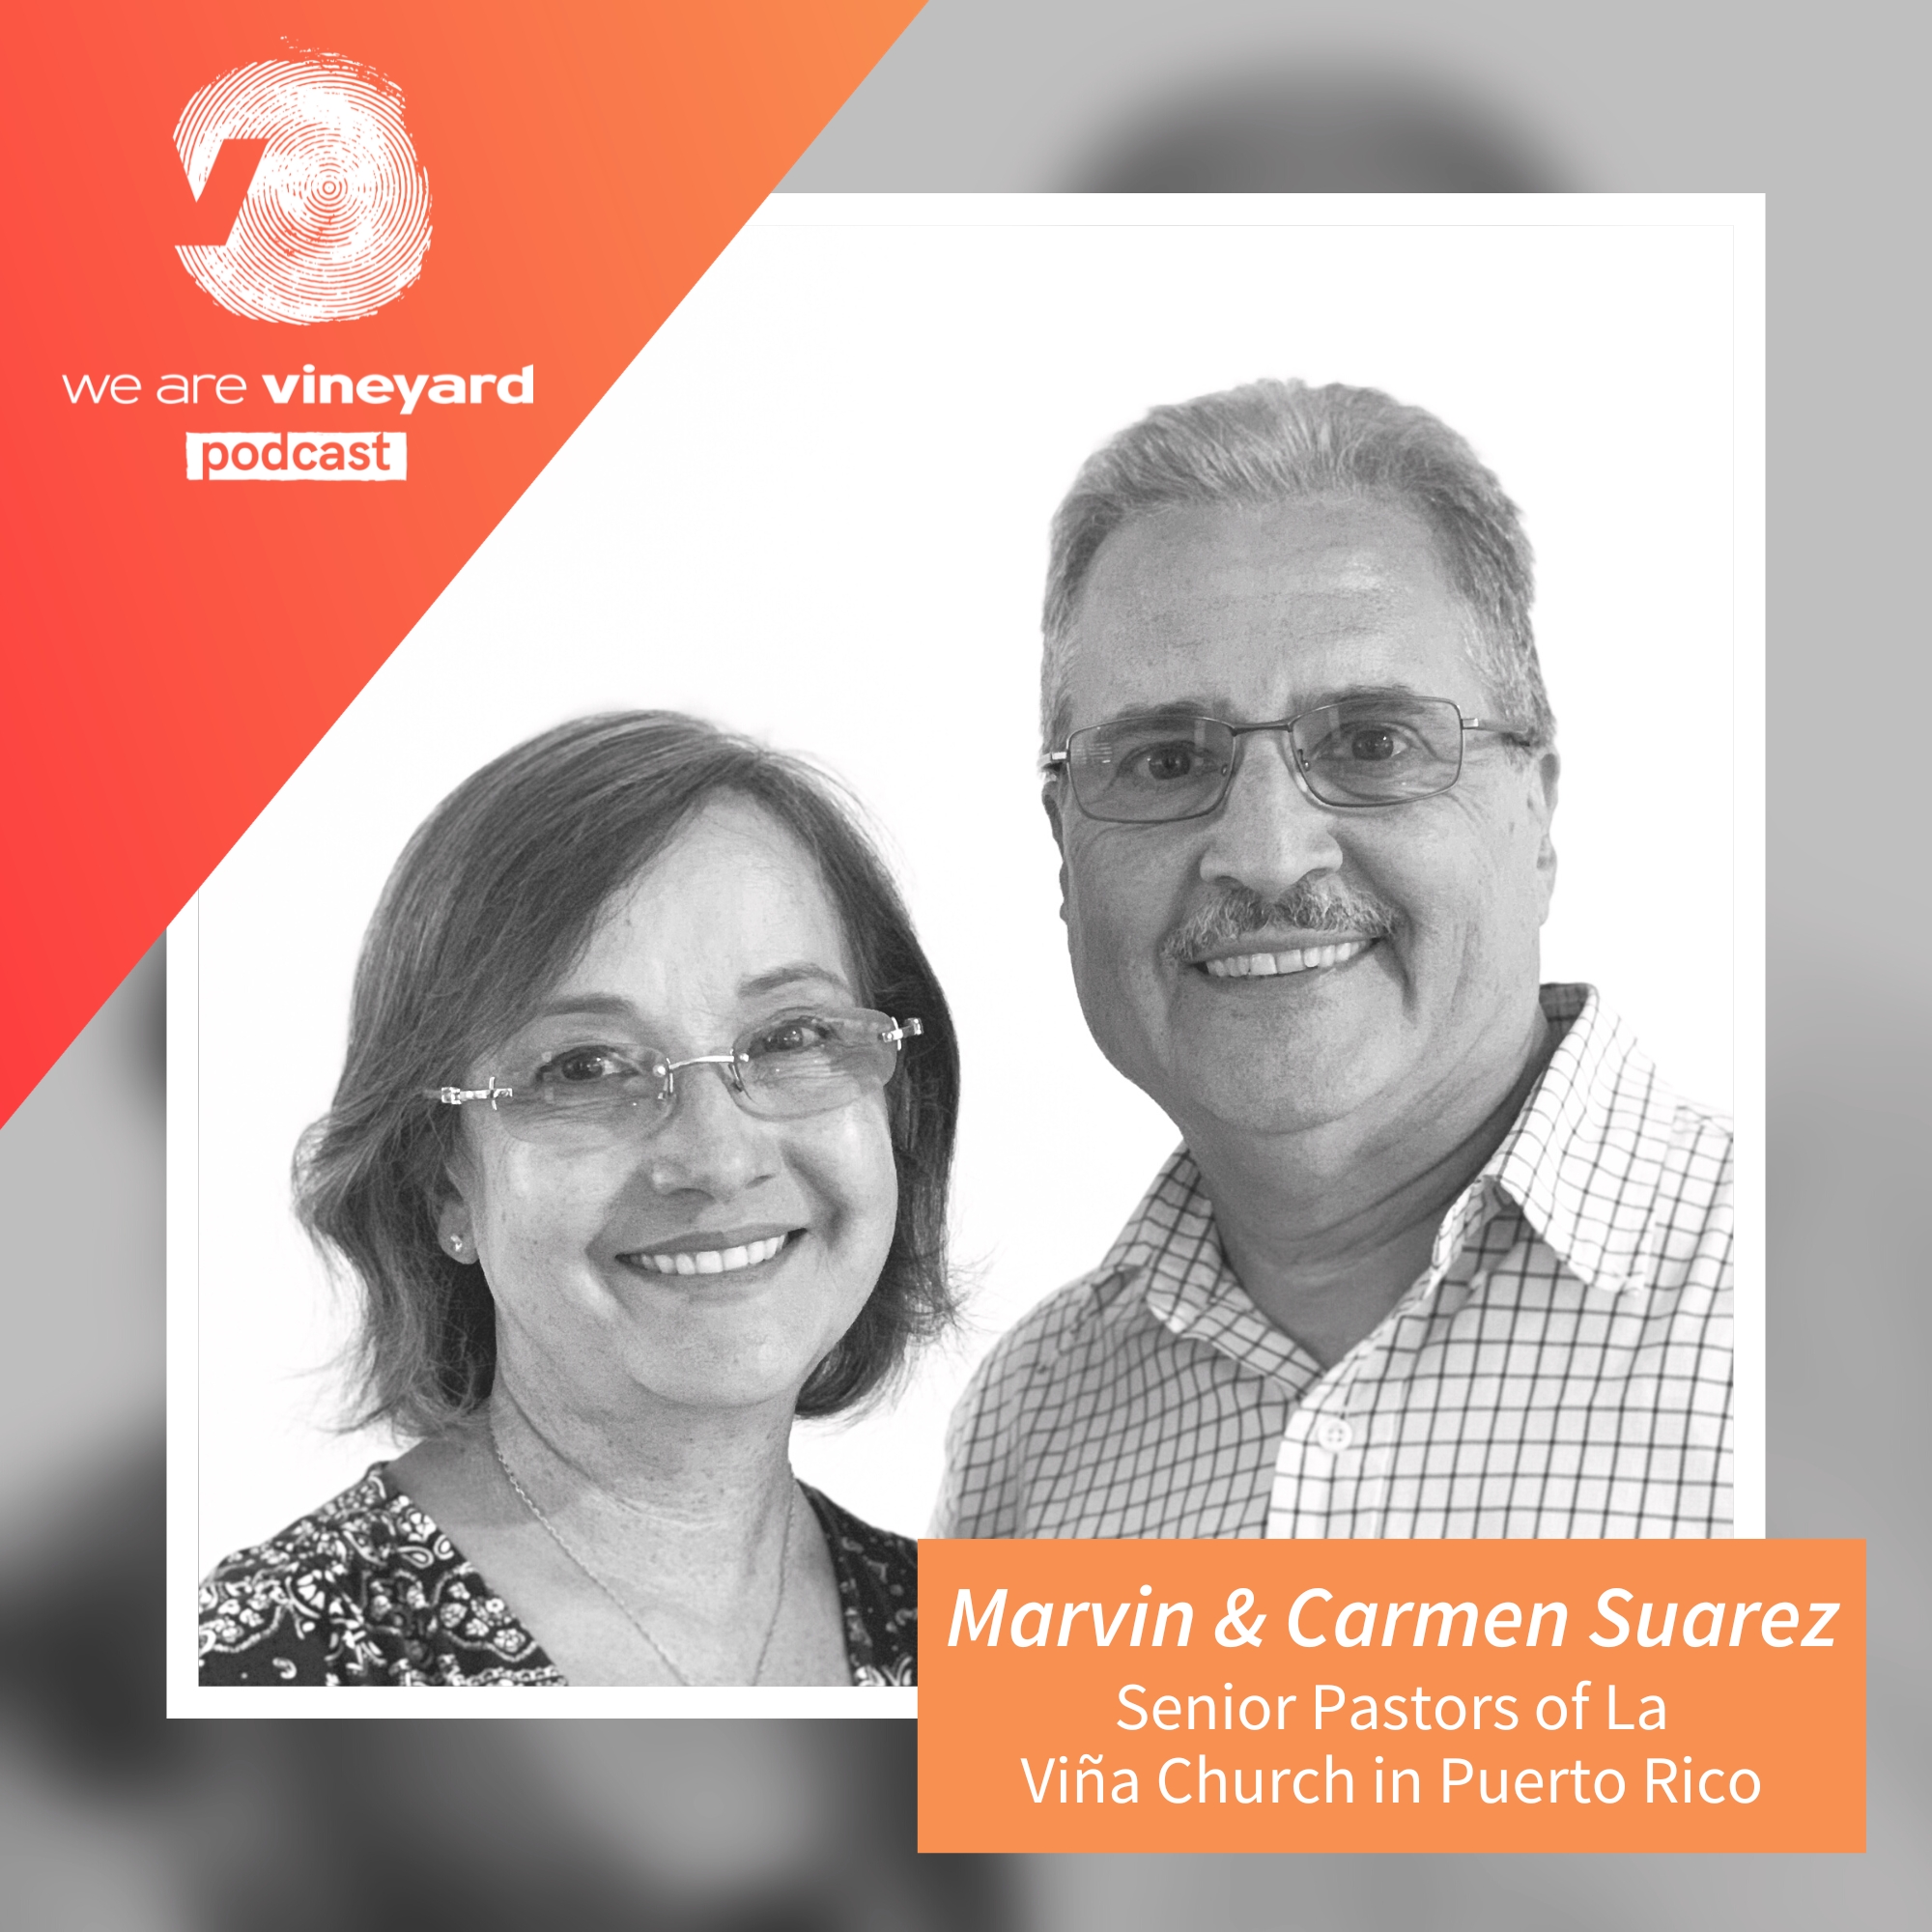 Marvin and Carmen Suarez: The Birth Of The Vineyard In Puerto Rico